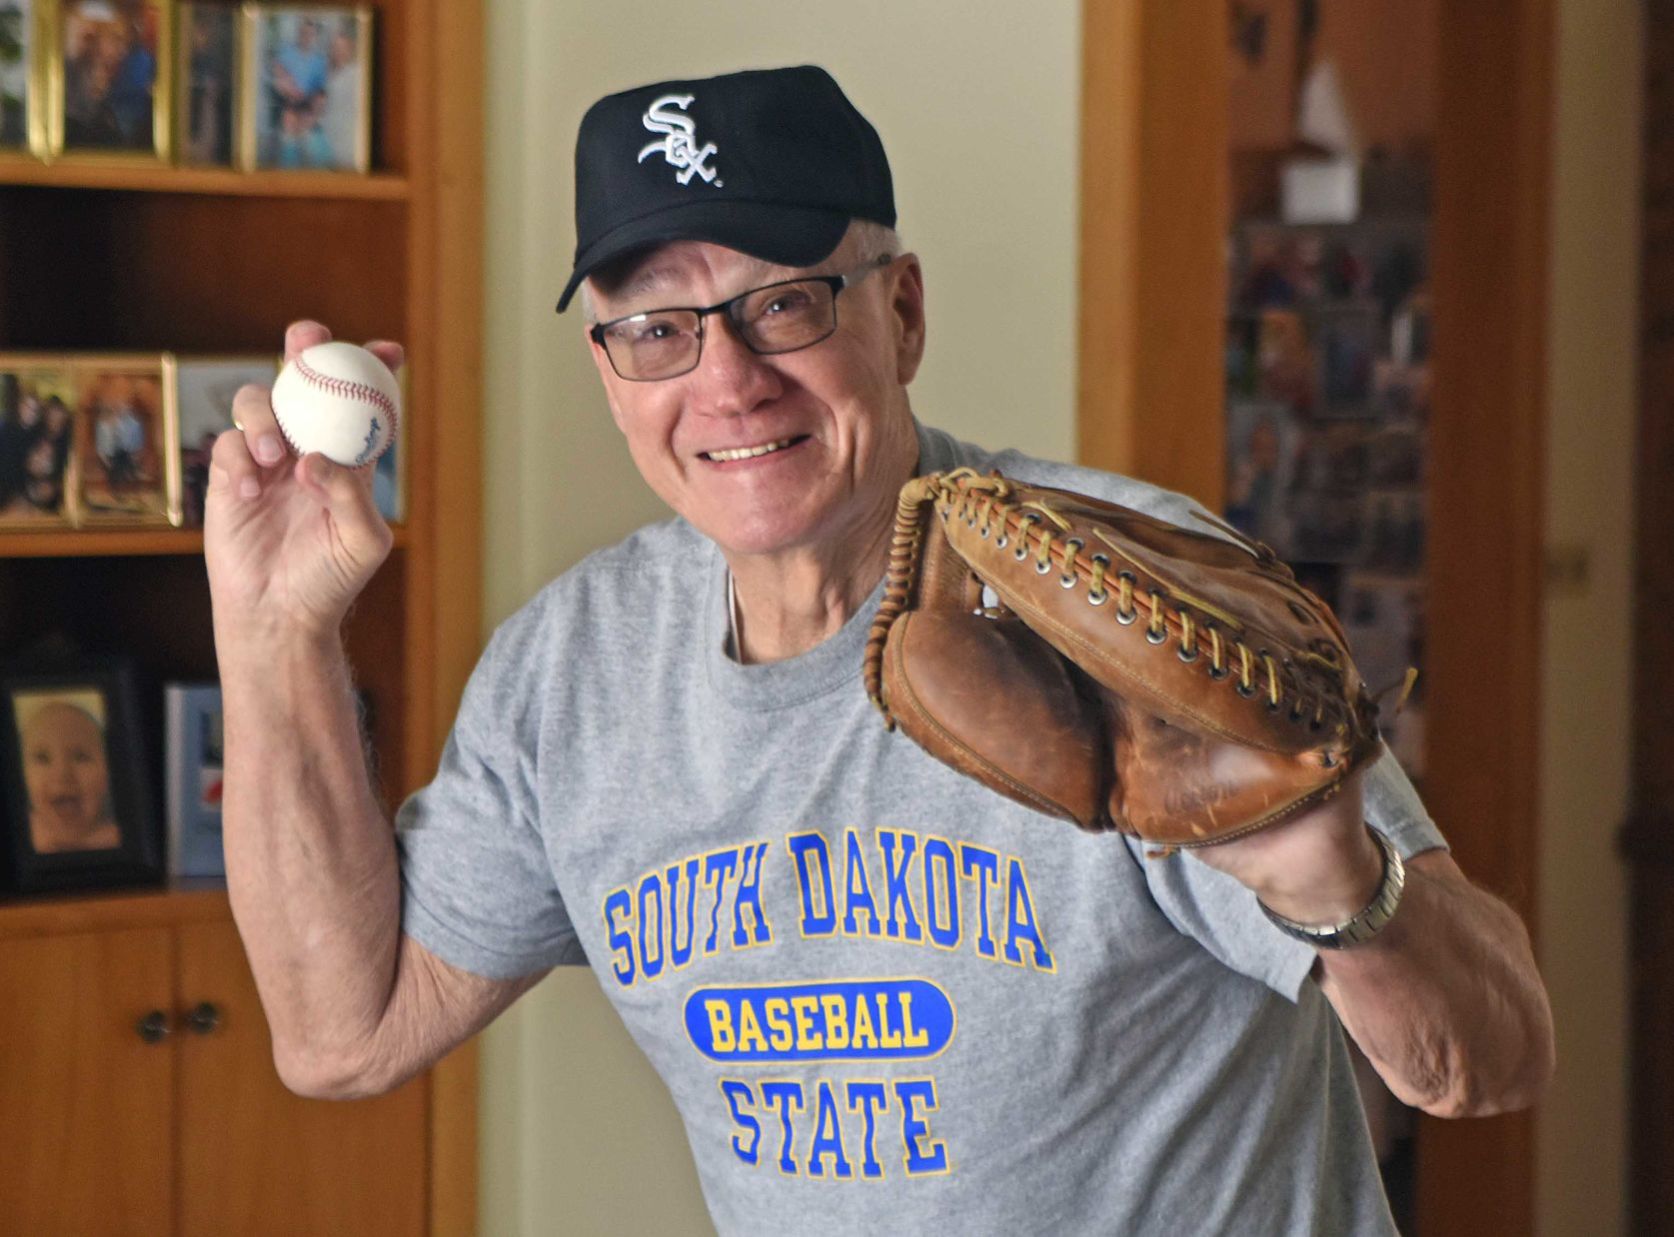 Second chance with White Sox might escape Mandan man due to coronavirus